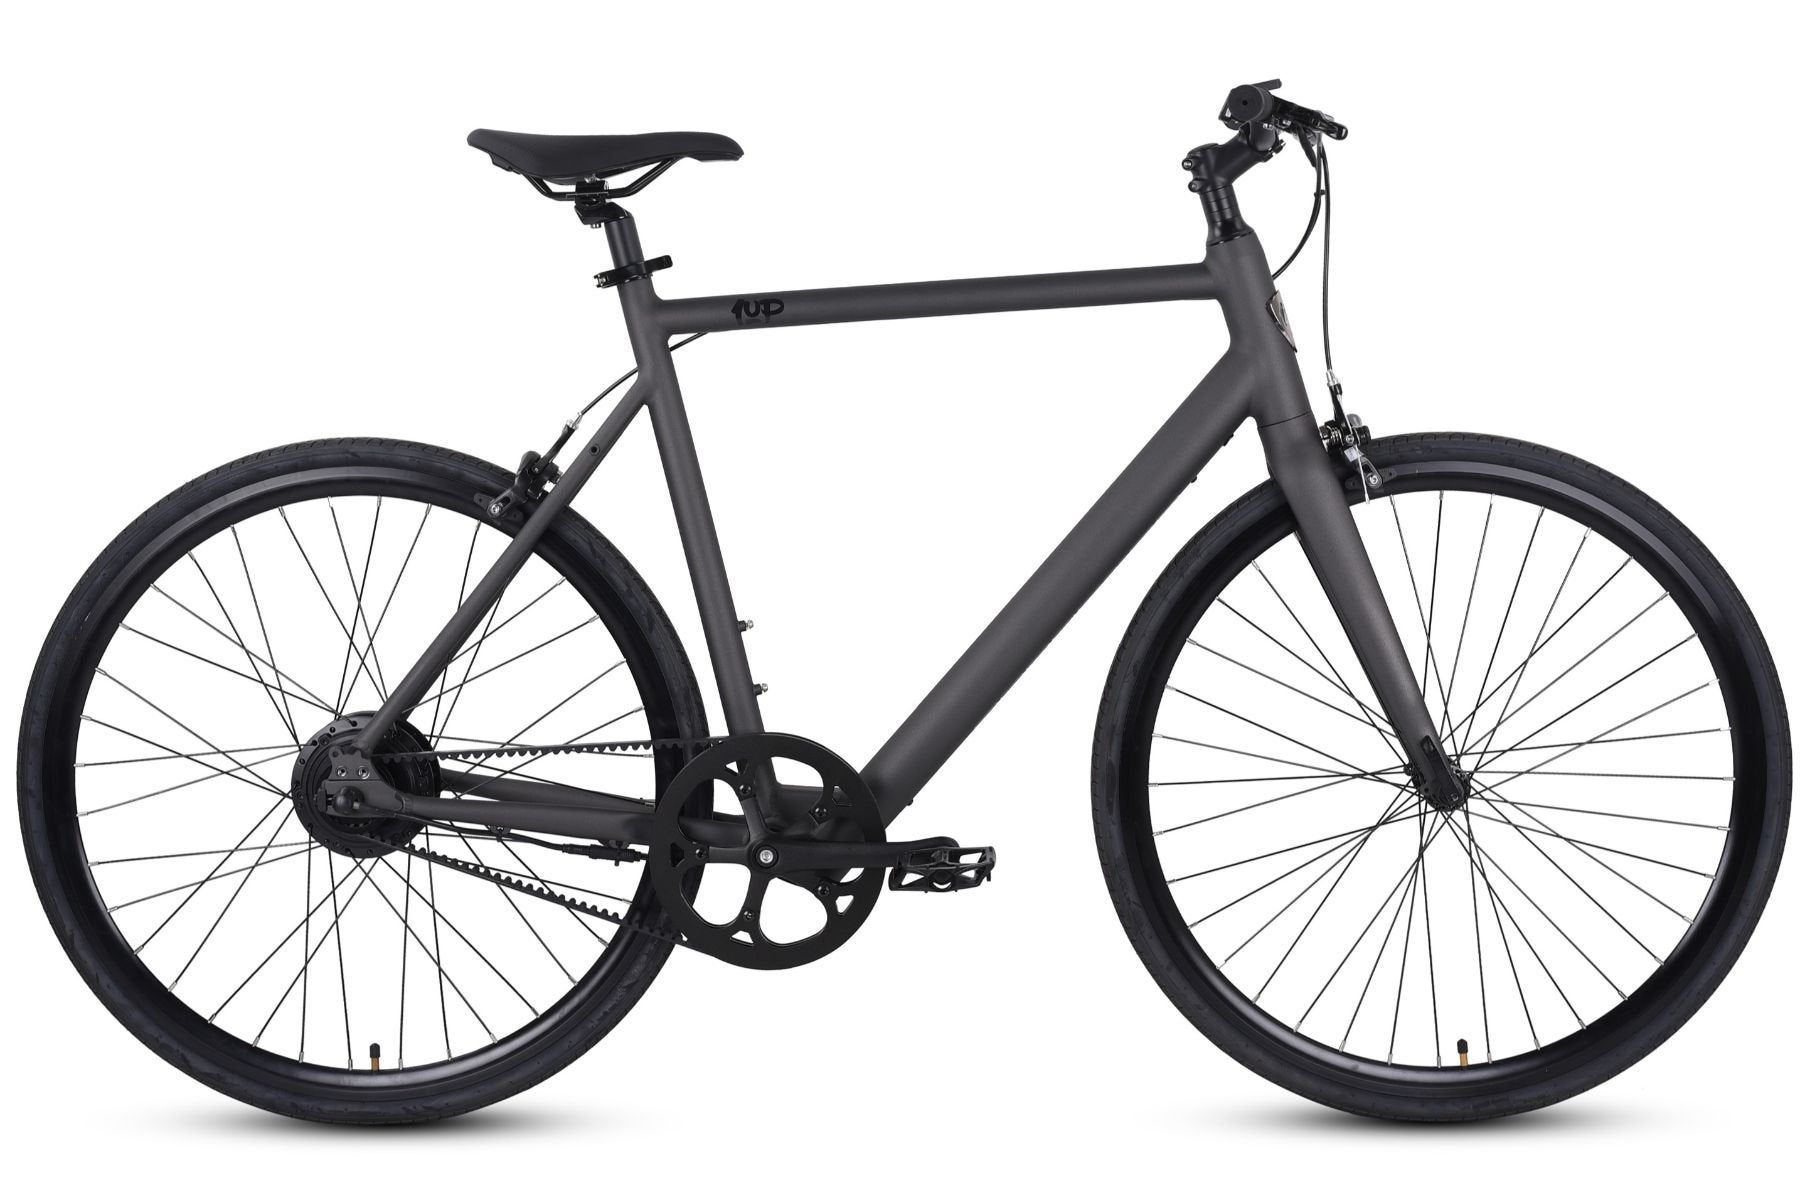 Looking for ebike that can be ridden like road bike when motor is off